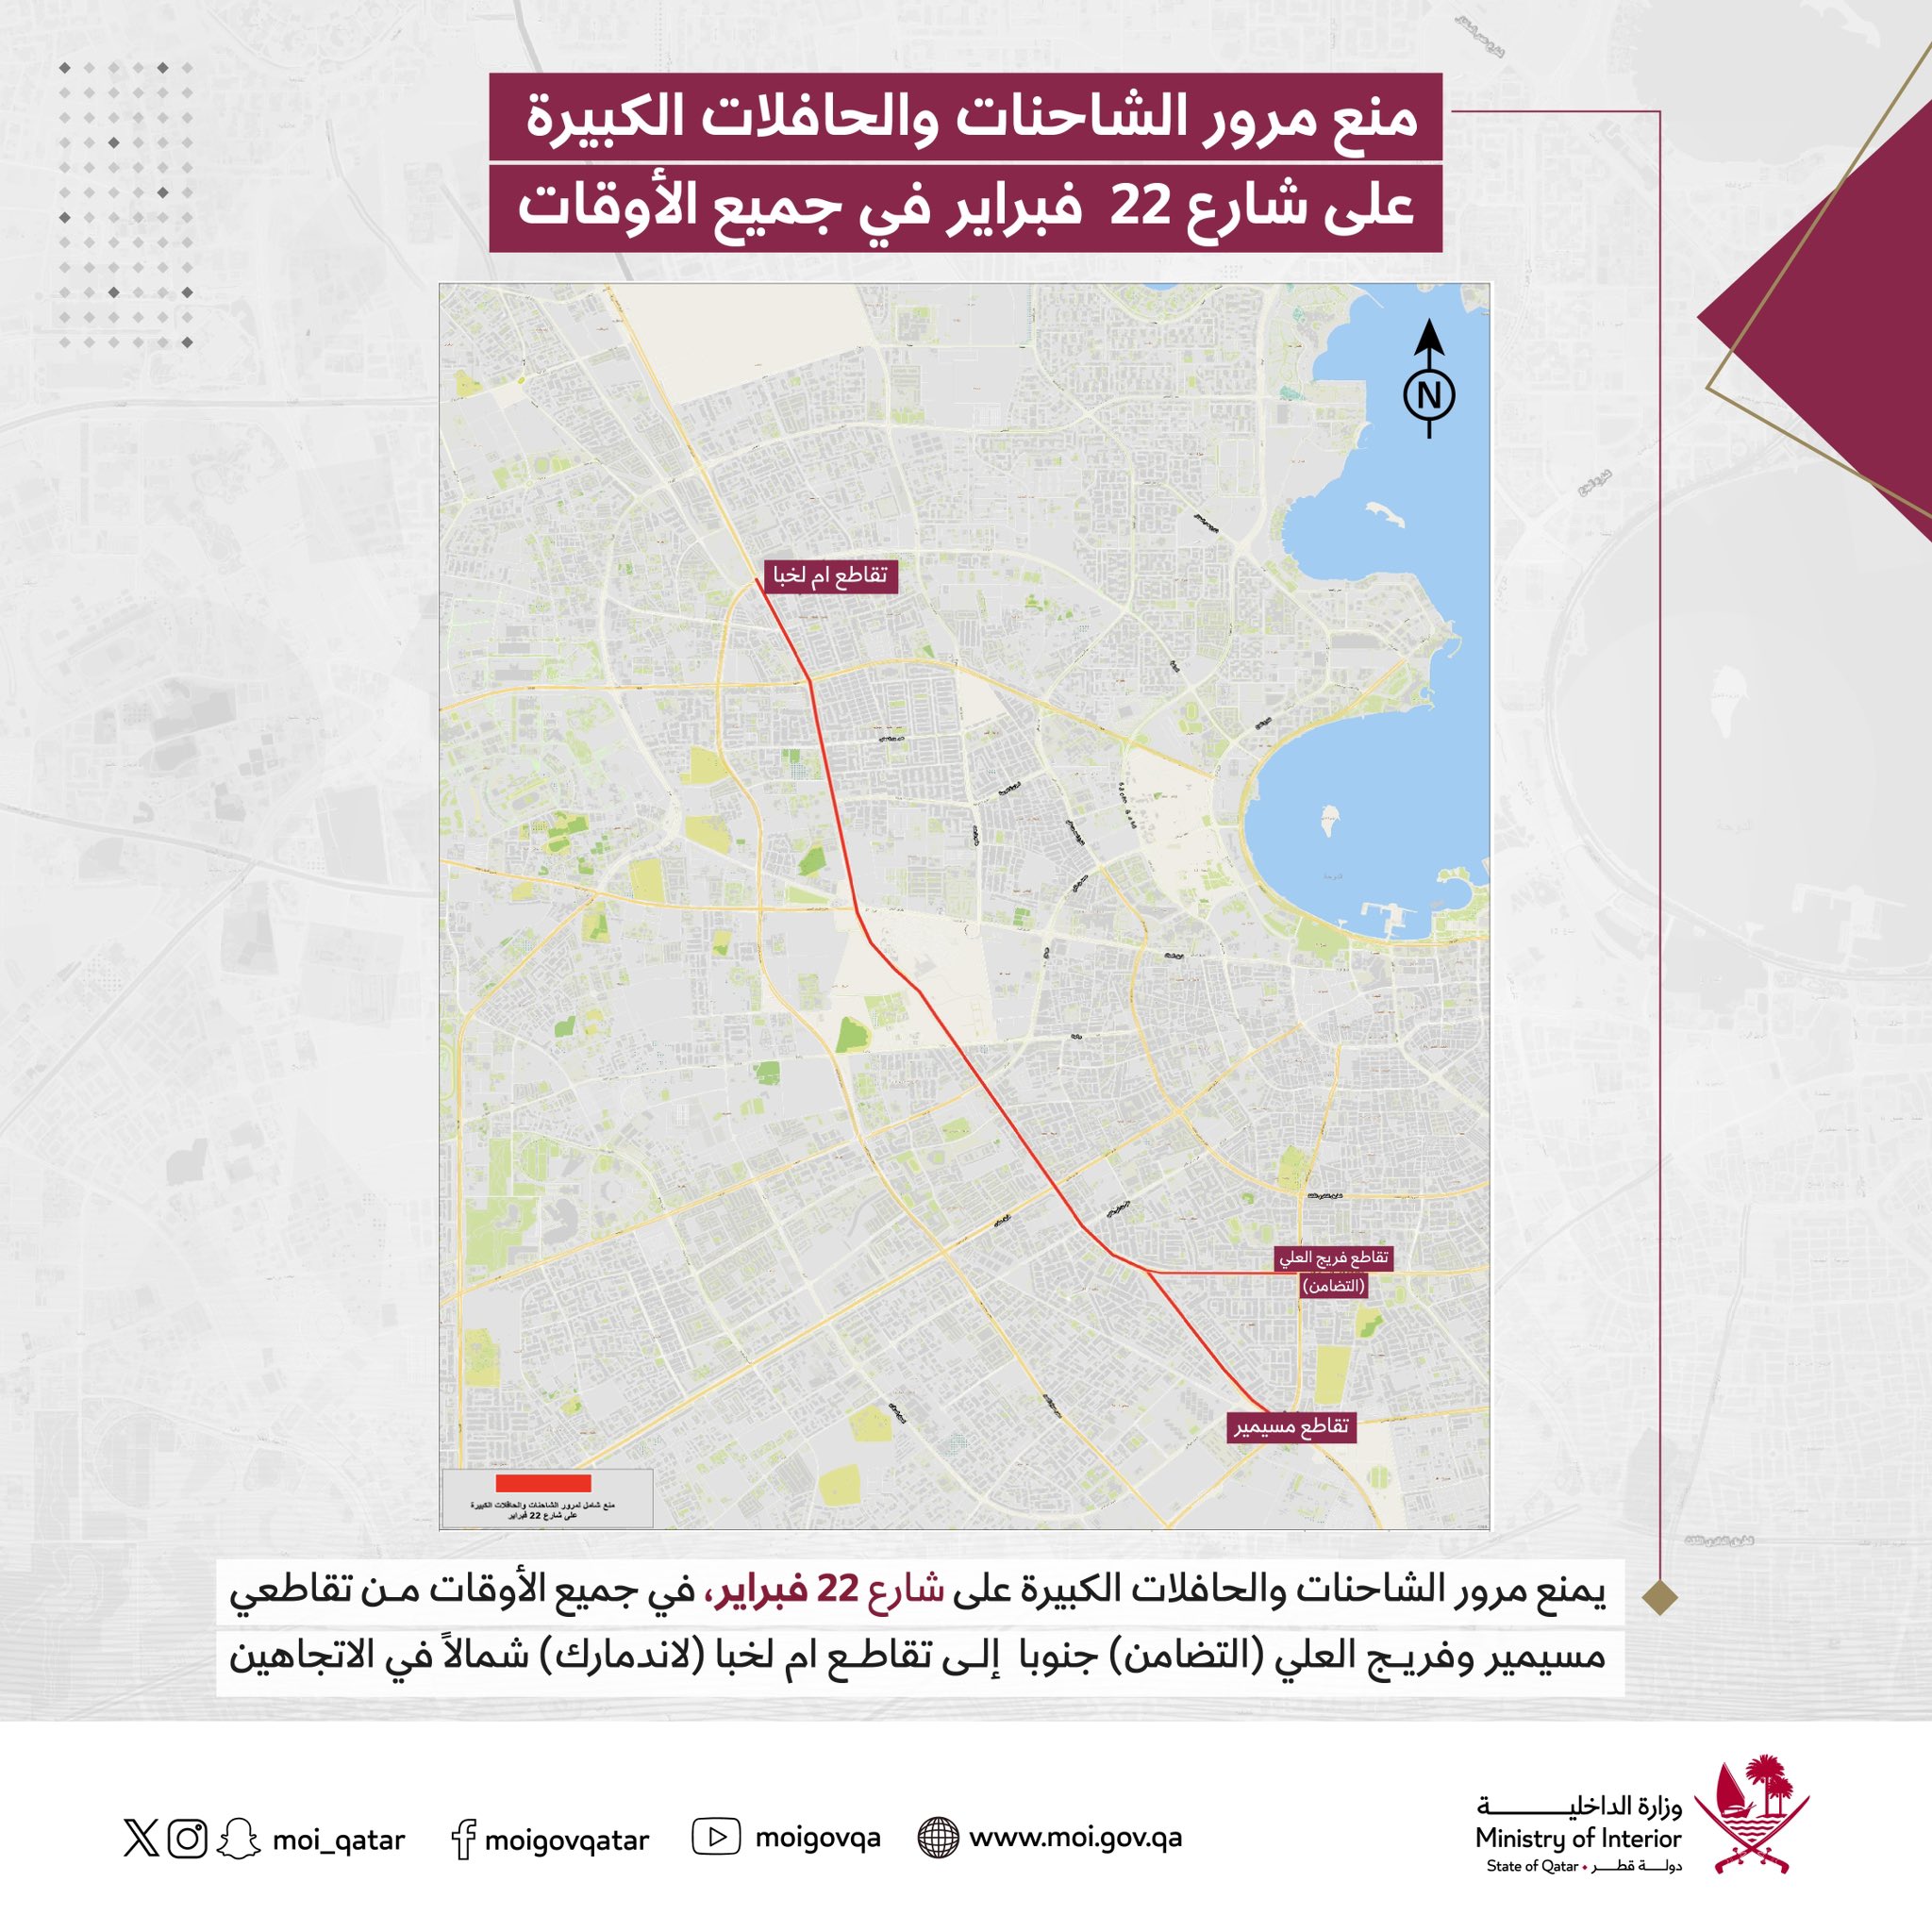 New Doha Traffic Rules for Trucks and Buses